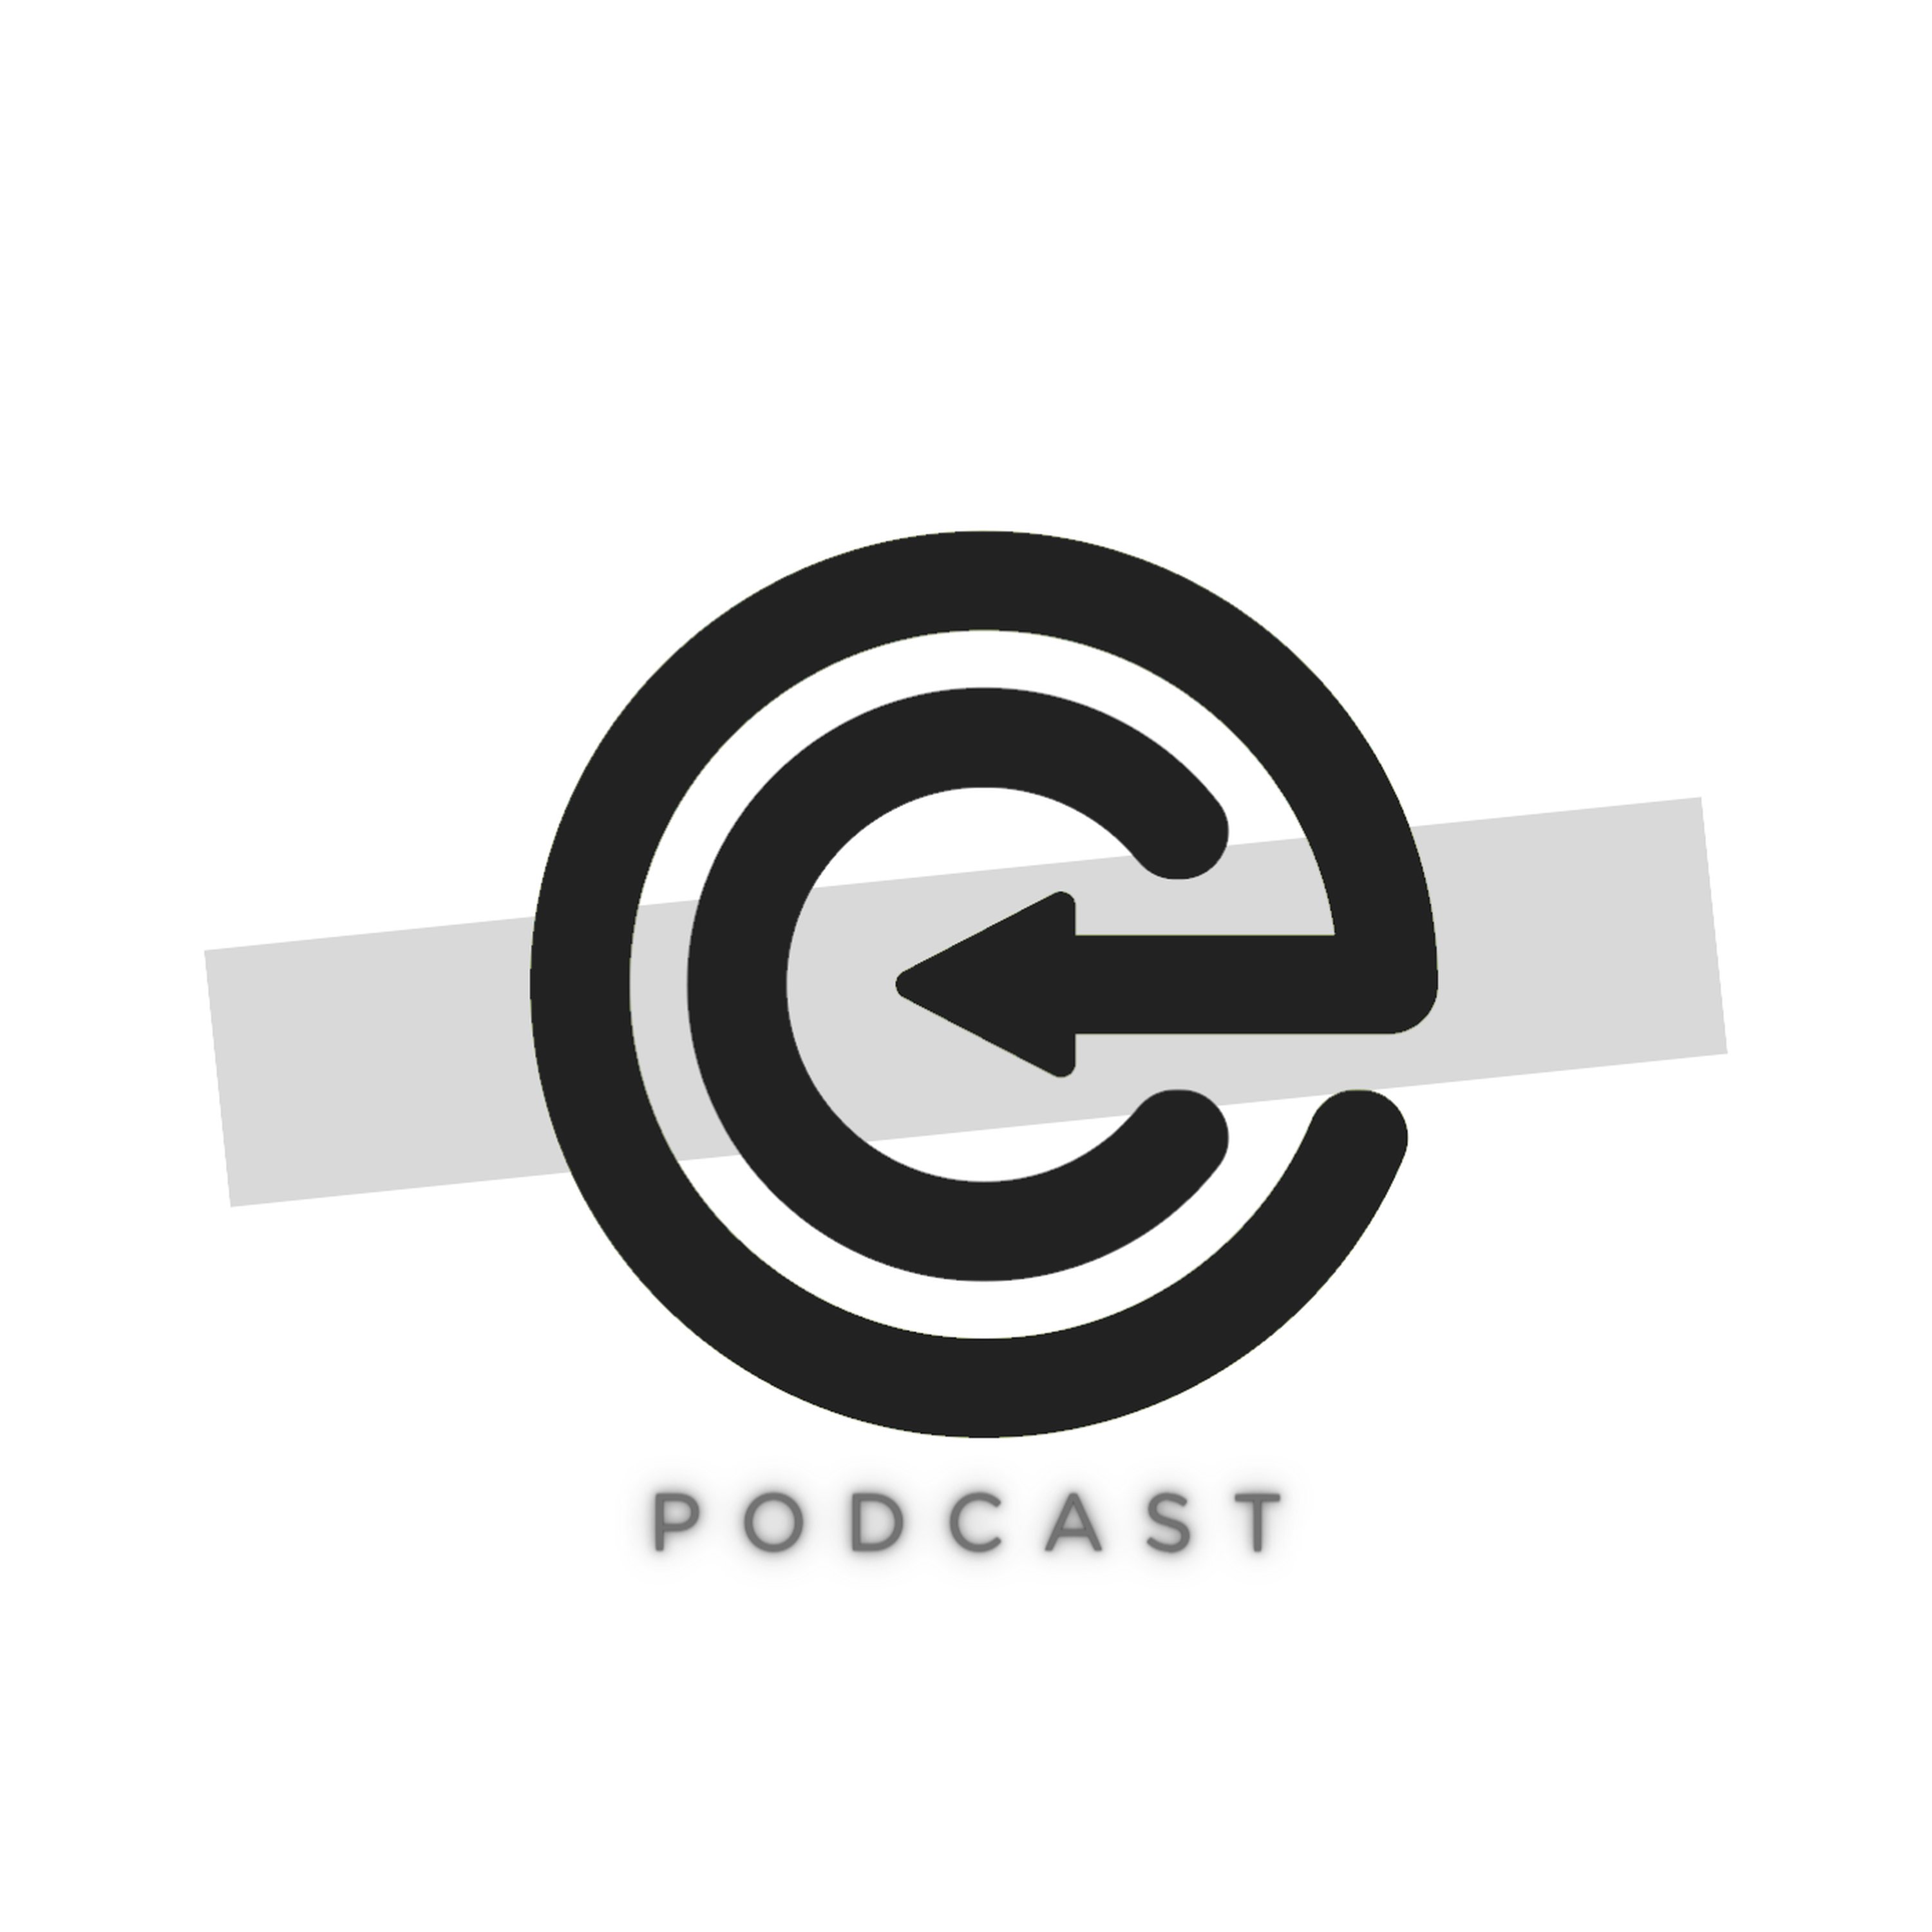 The EC Podcast